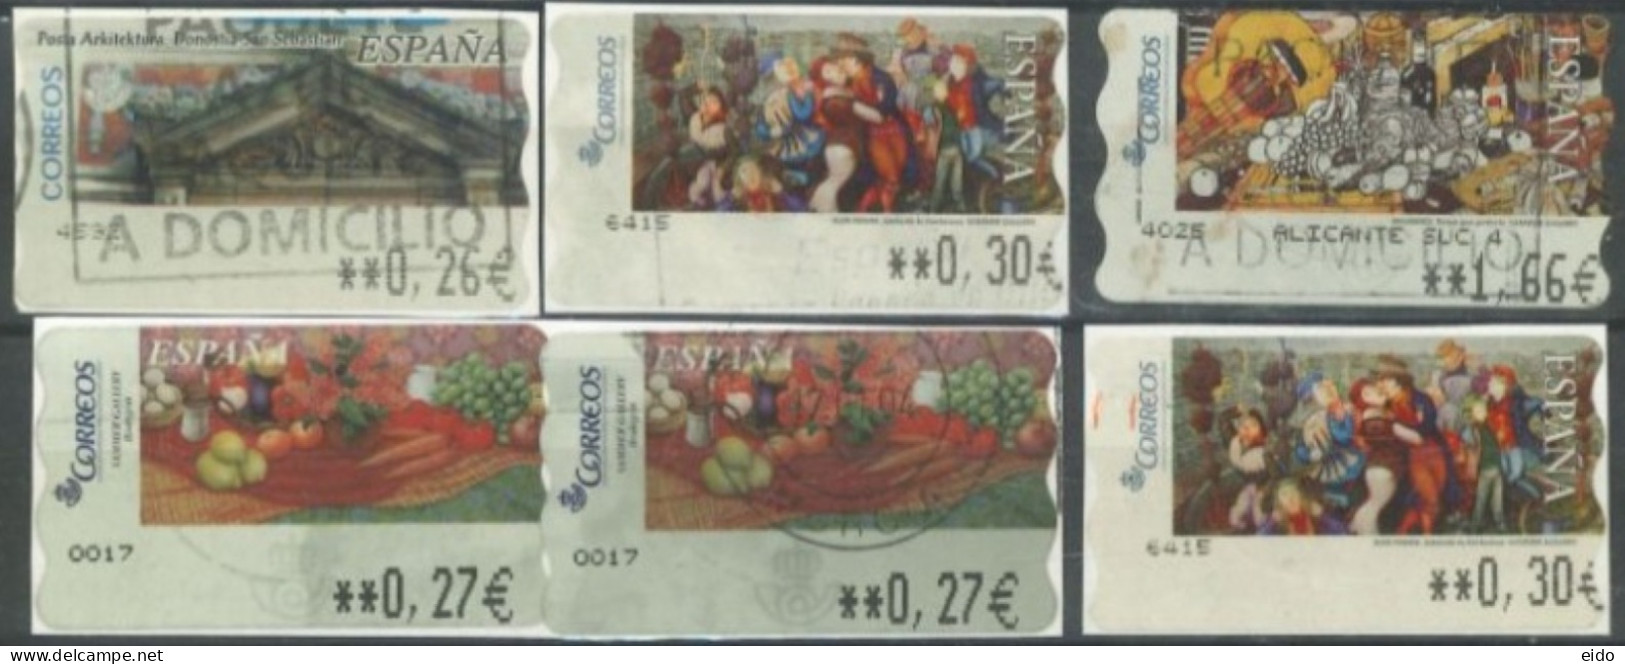 SPAIN- 2003/04,SAN SABASTIAN ARCH. AND SAMMER GALLERY STAMPS LABELS SET OF 6, DIFFERENT VALUES, USED. - Used Stamps